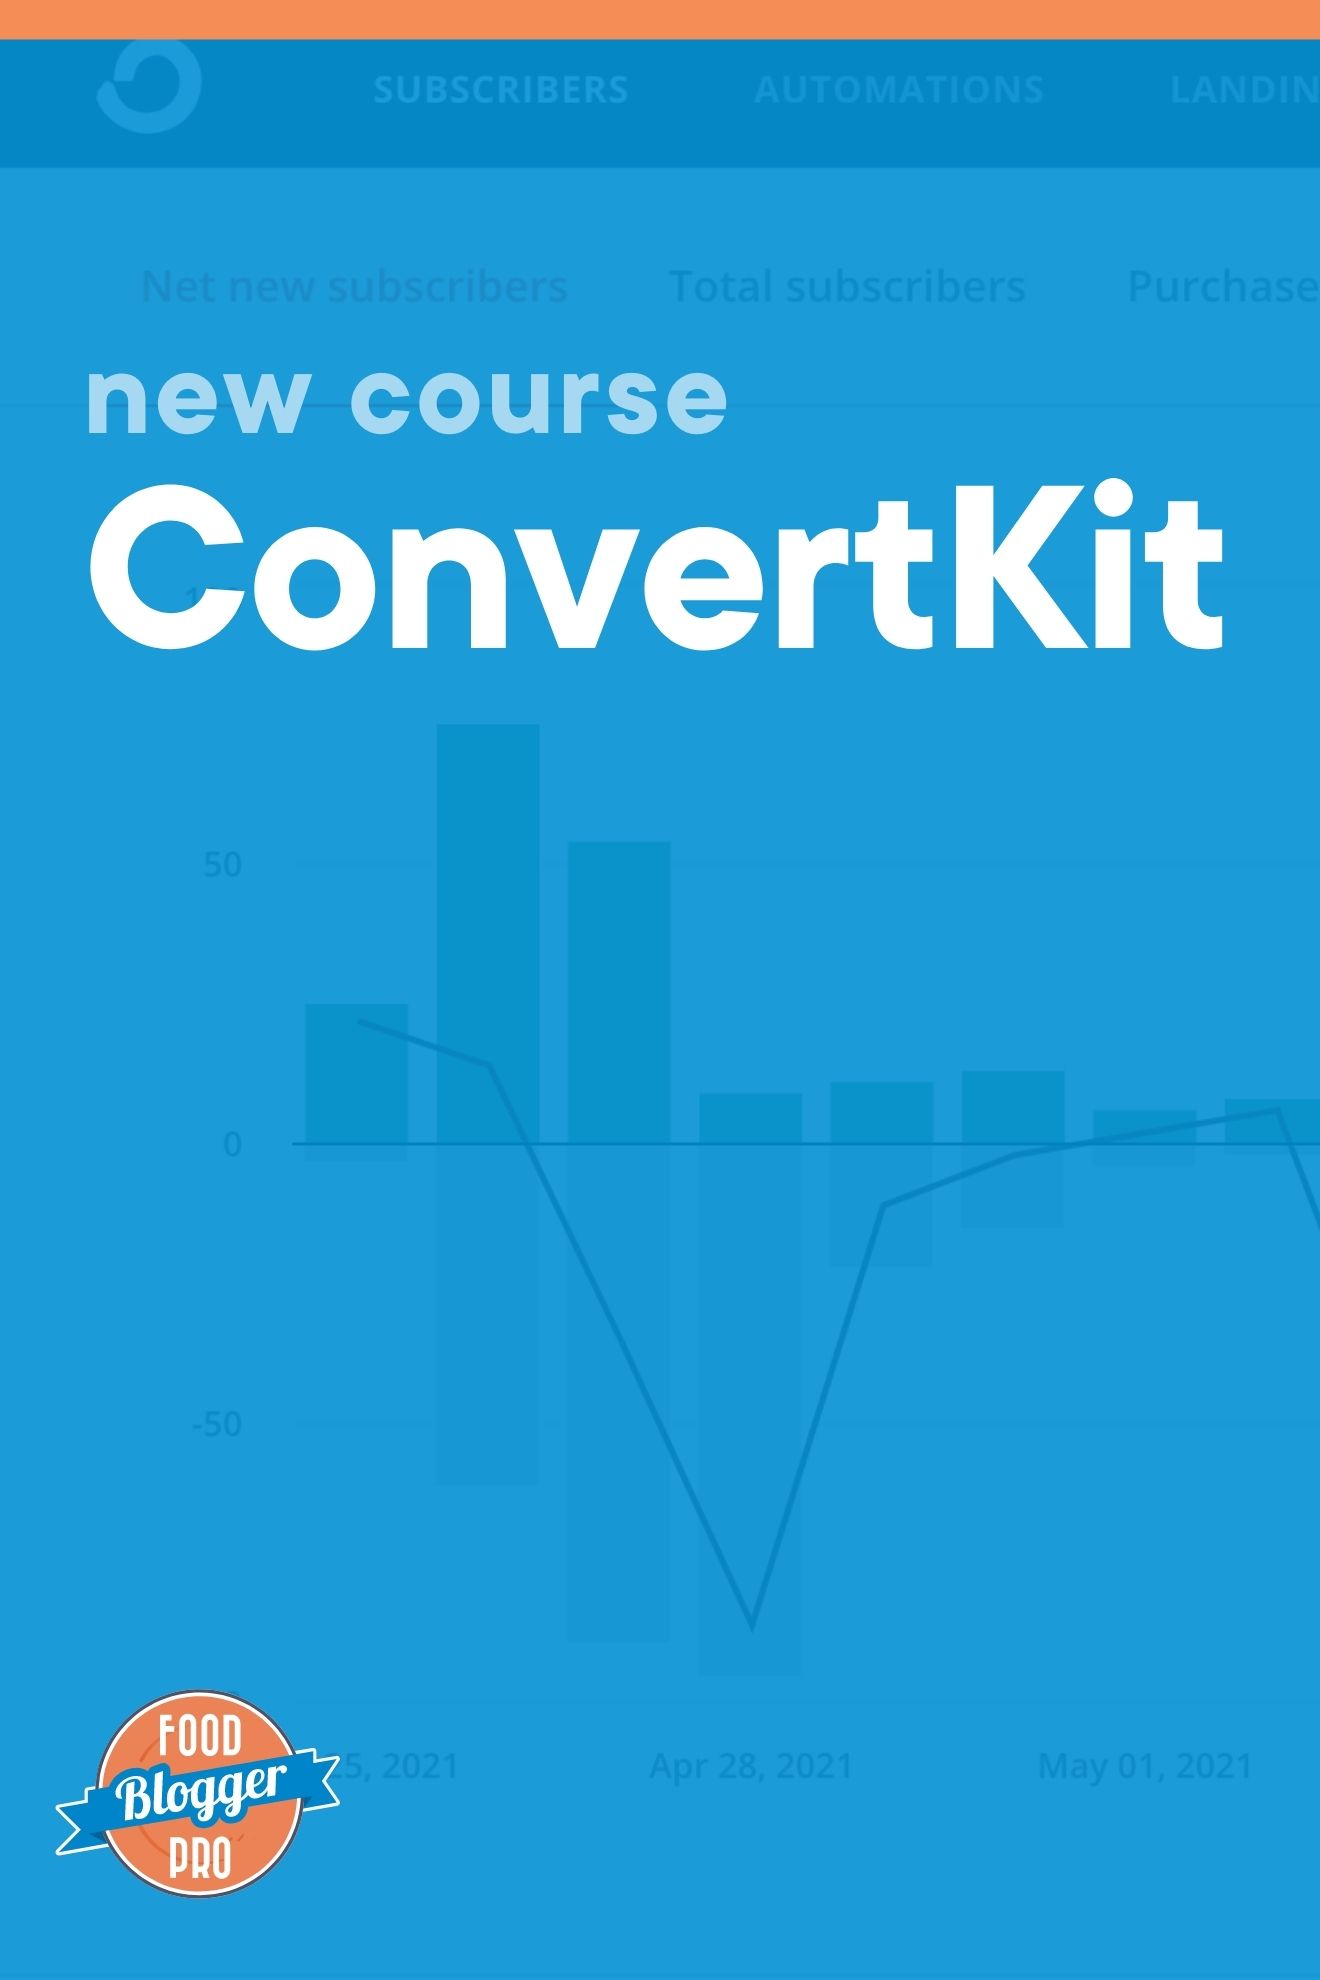 Blue graphic of ConvertKit home page that reads 'New Course: ConvertKit' with Food Blogger Pro logo